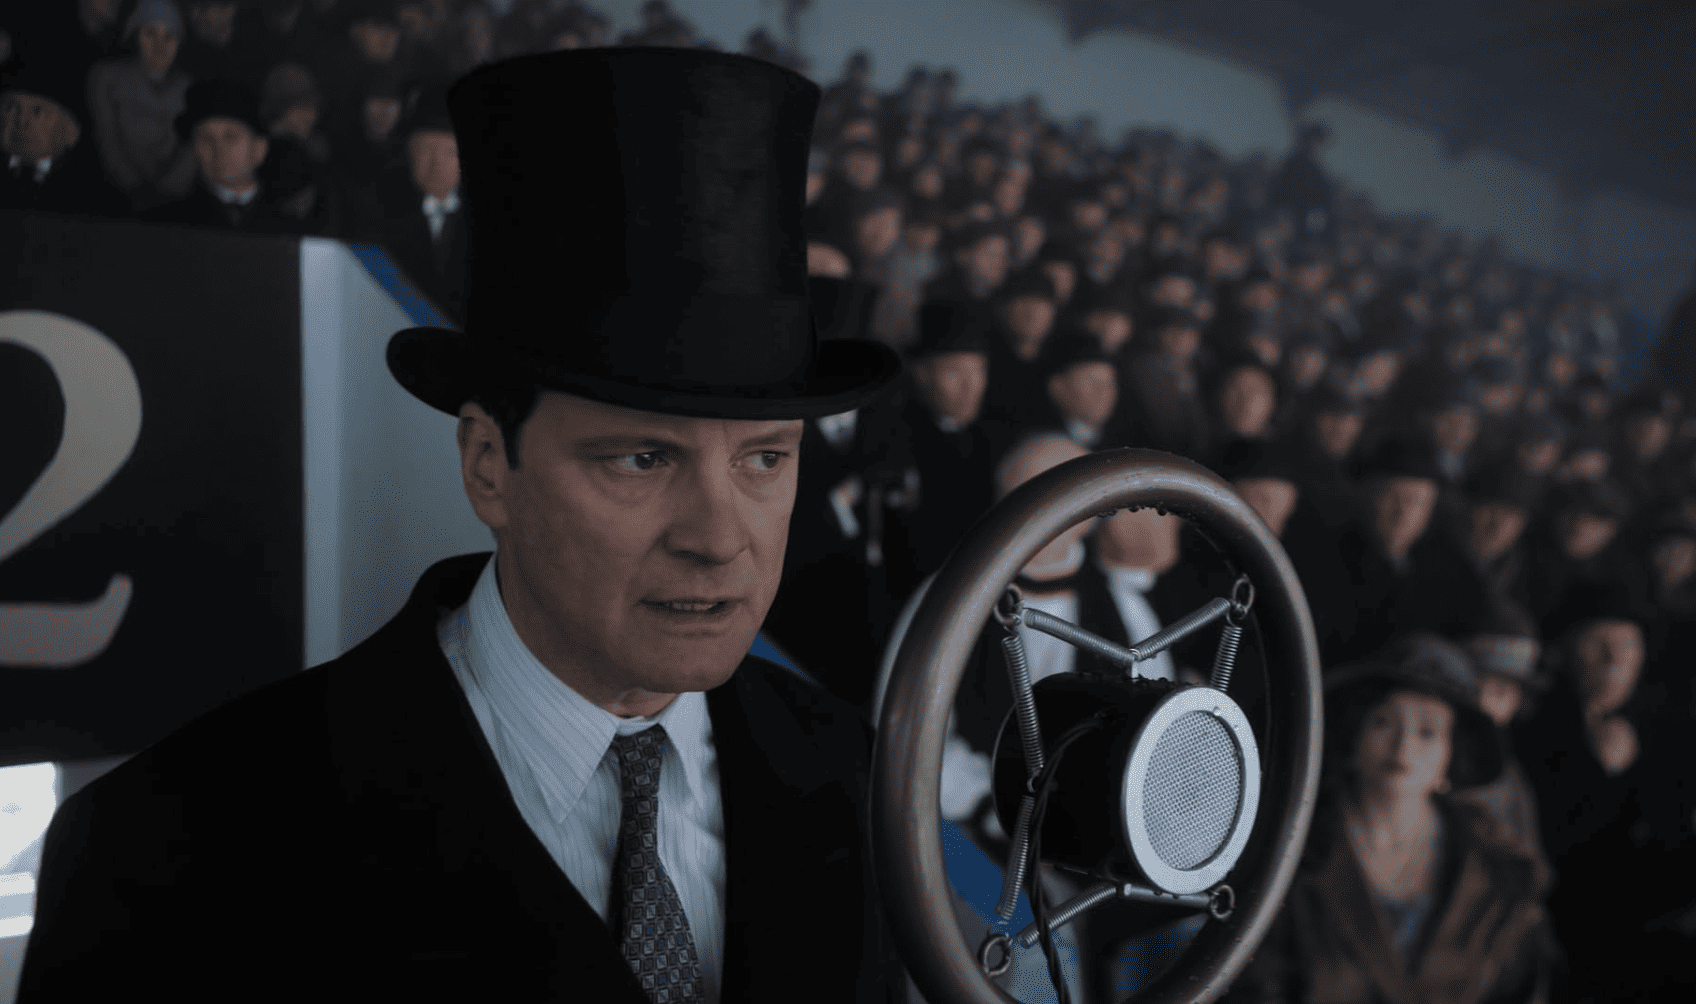 Colin Firth as King George VI delivering a speech inside a crowded stadium in this image from Momentum Pictures